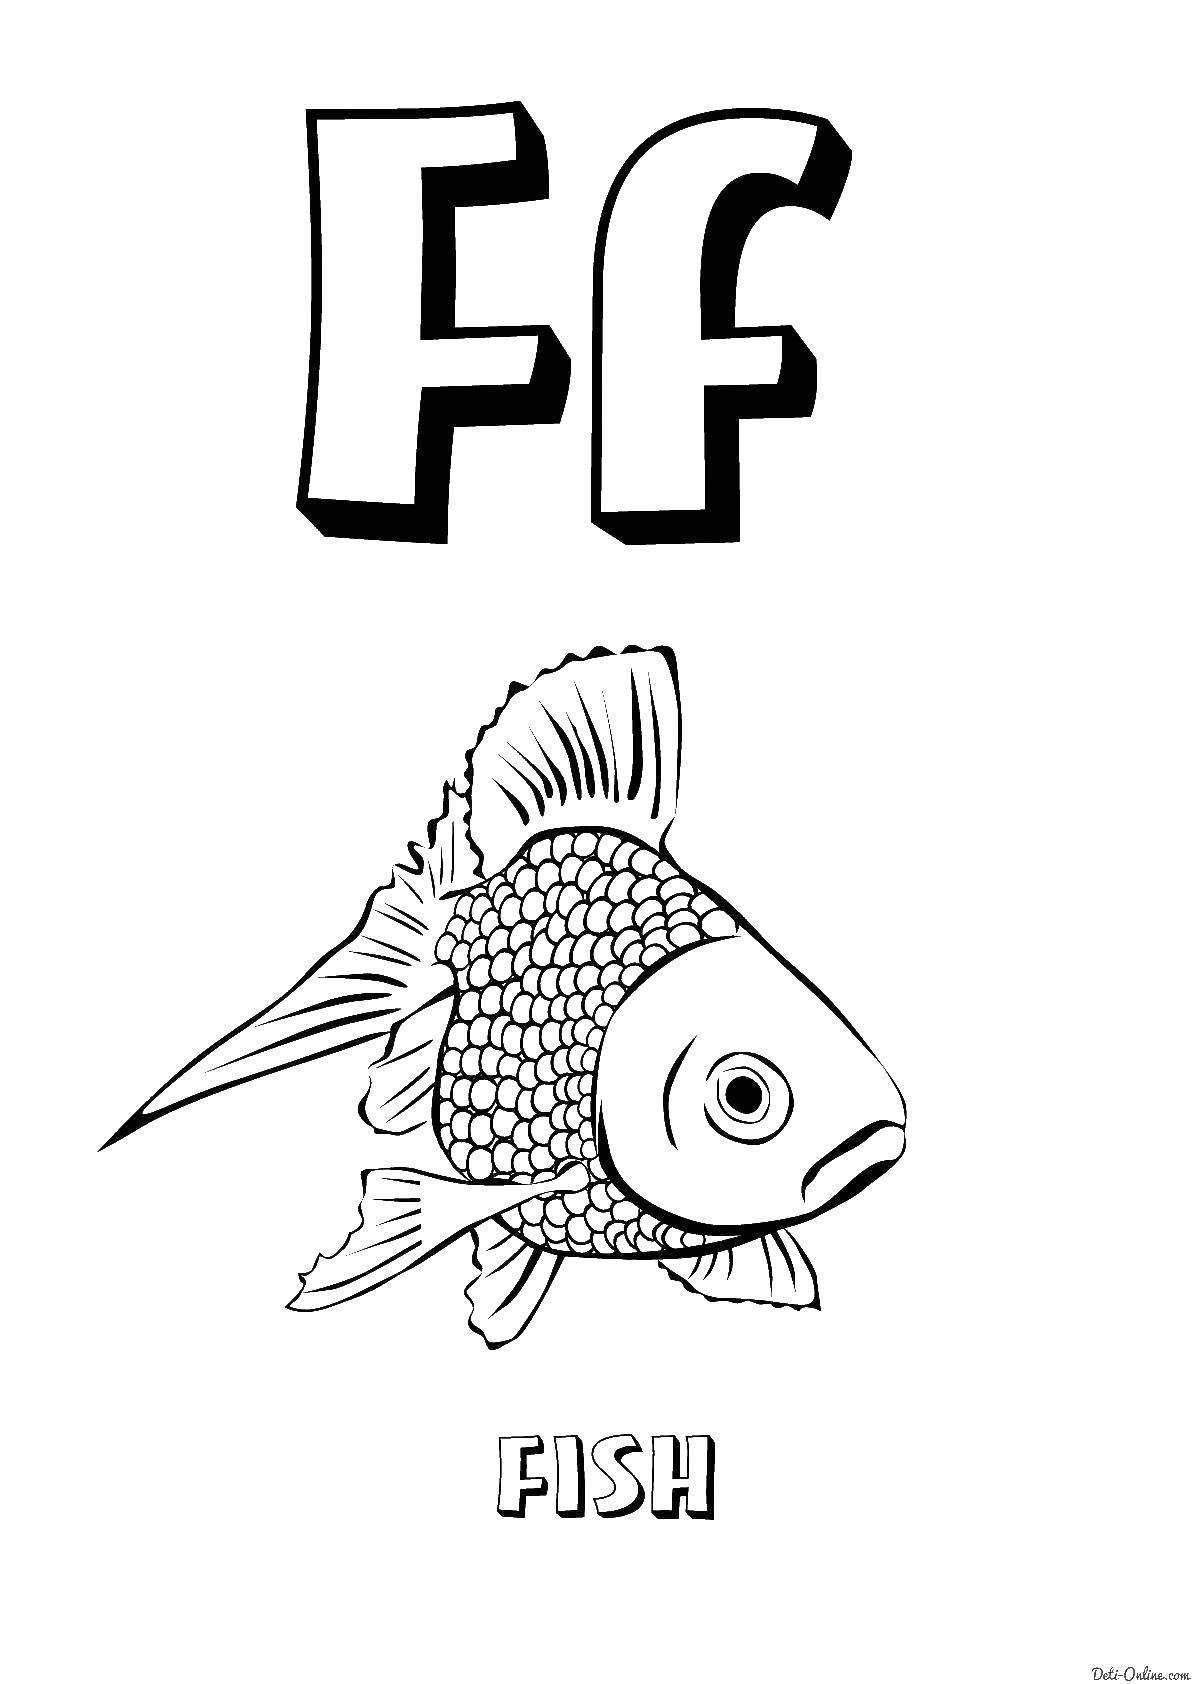 Coloring Letter f. Category English. Tags:  letter F, fish.